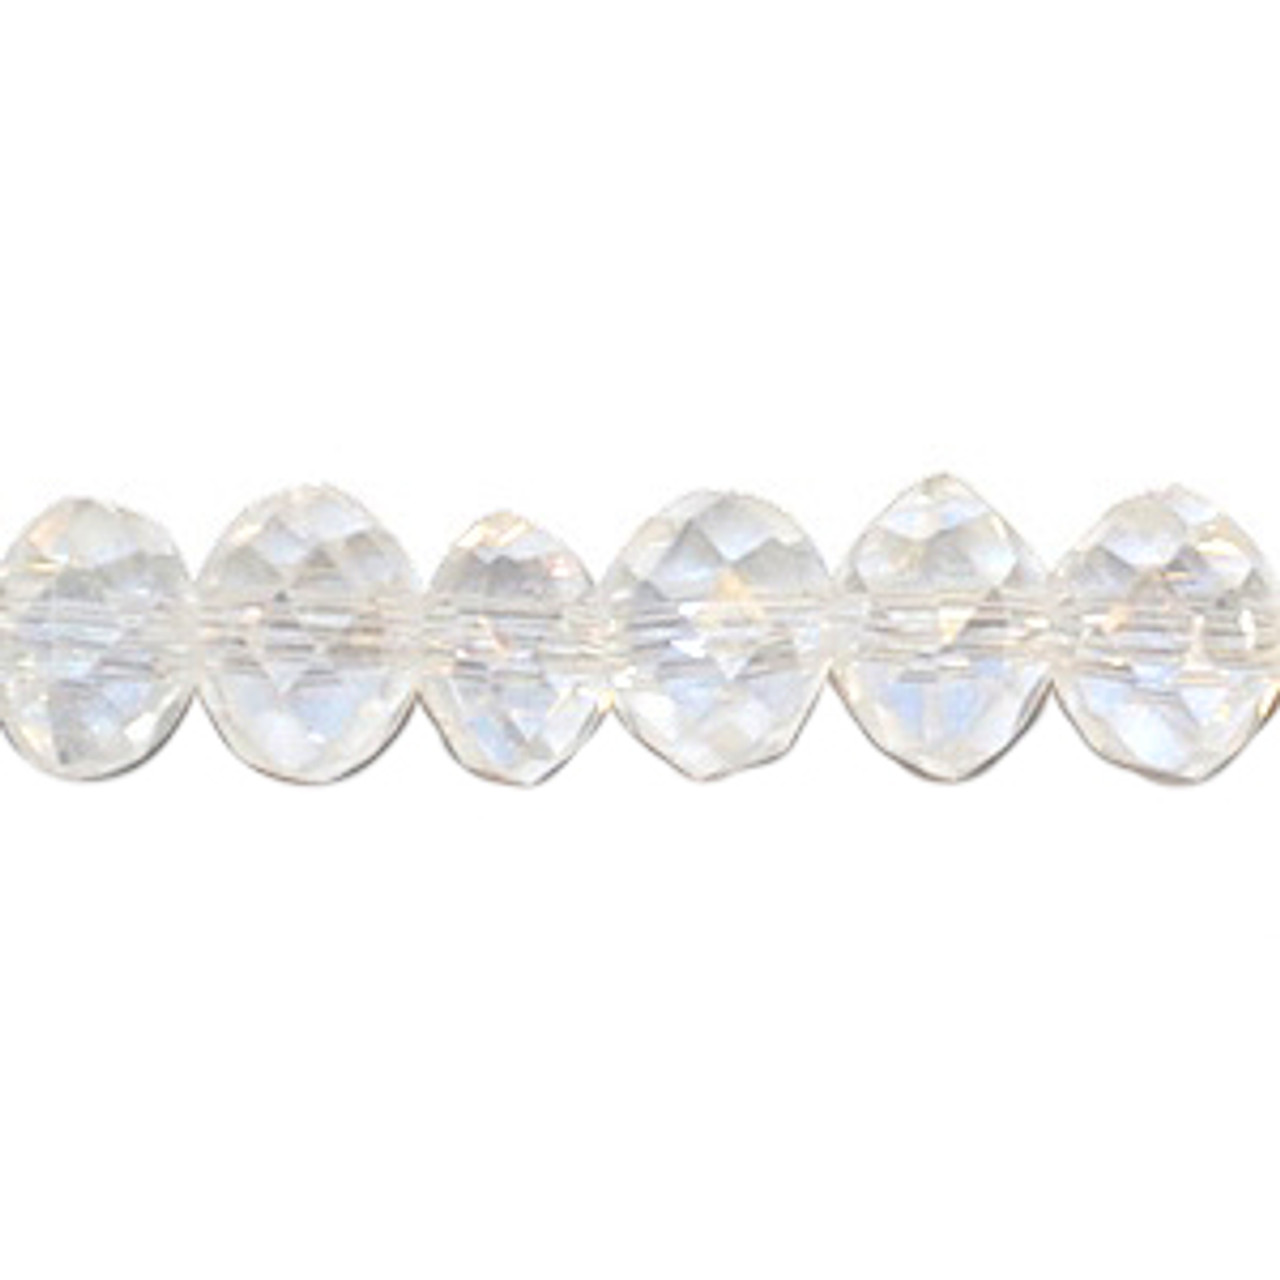 8x6mm Crystal AB Faceted Roundel (65 Beads) #1AB